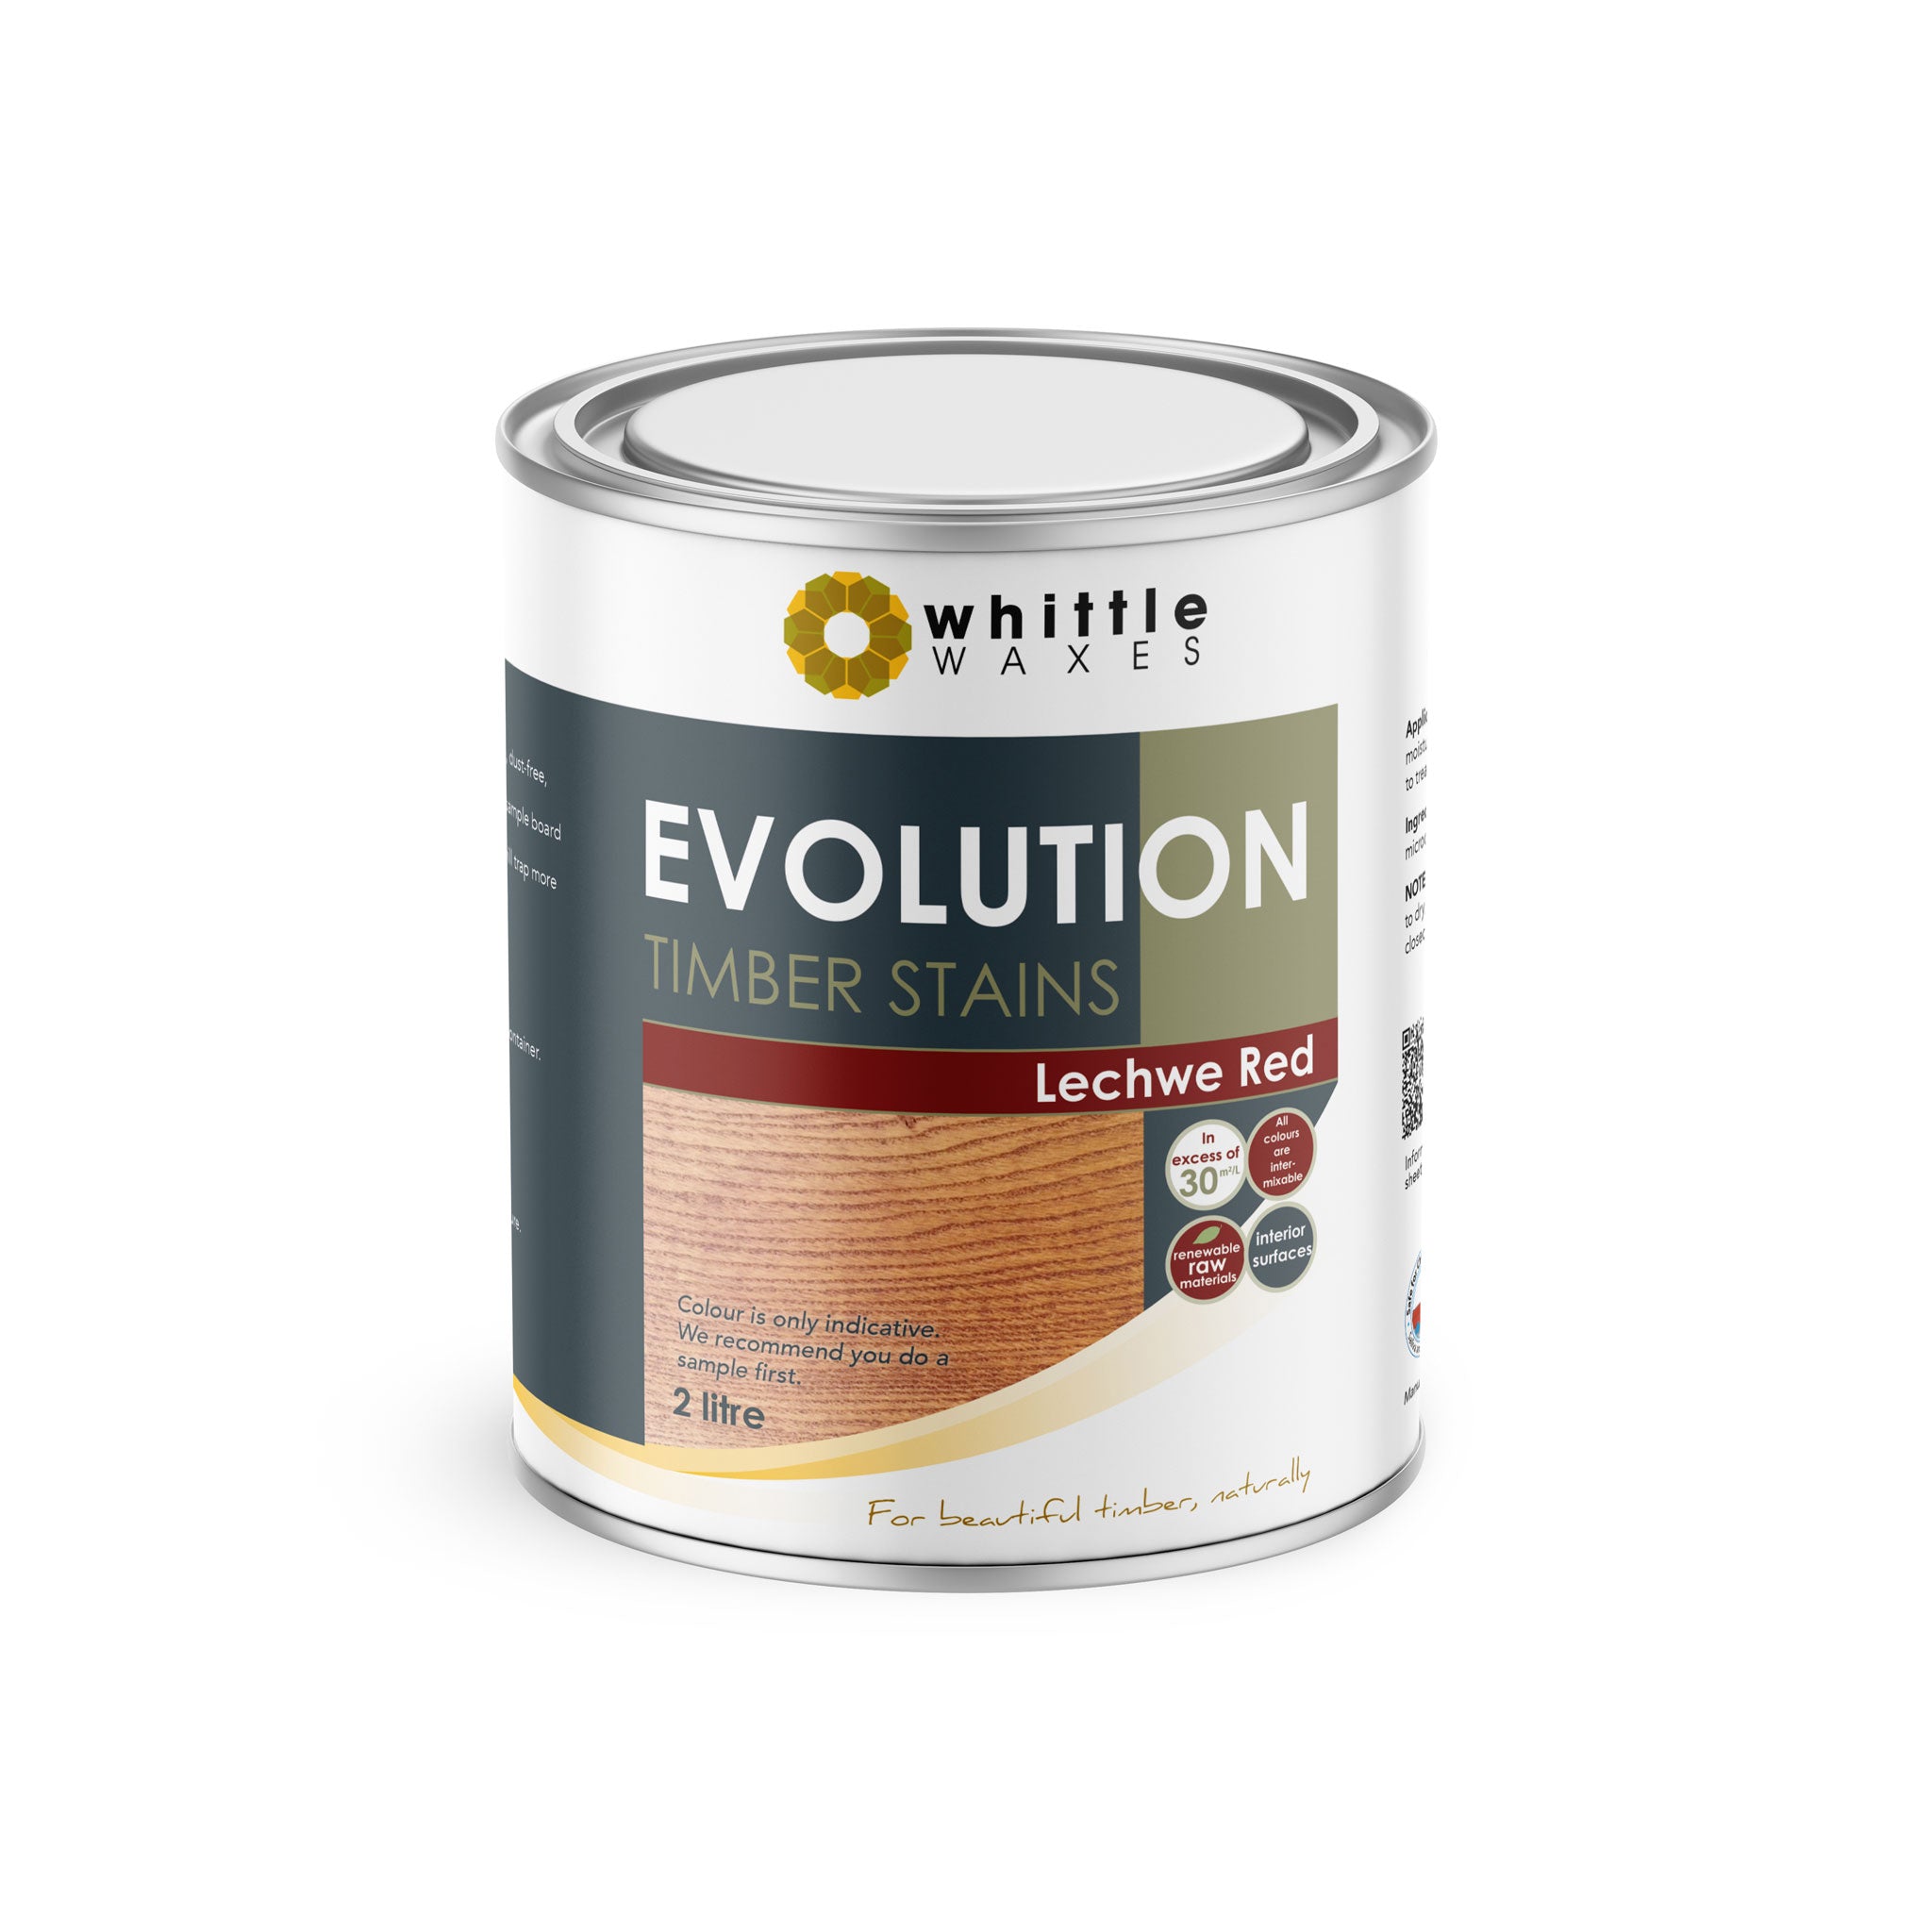 Whittle Waxes Evolution Colours (Lechwe Red) - quality timber stain - 2 Litre